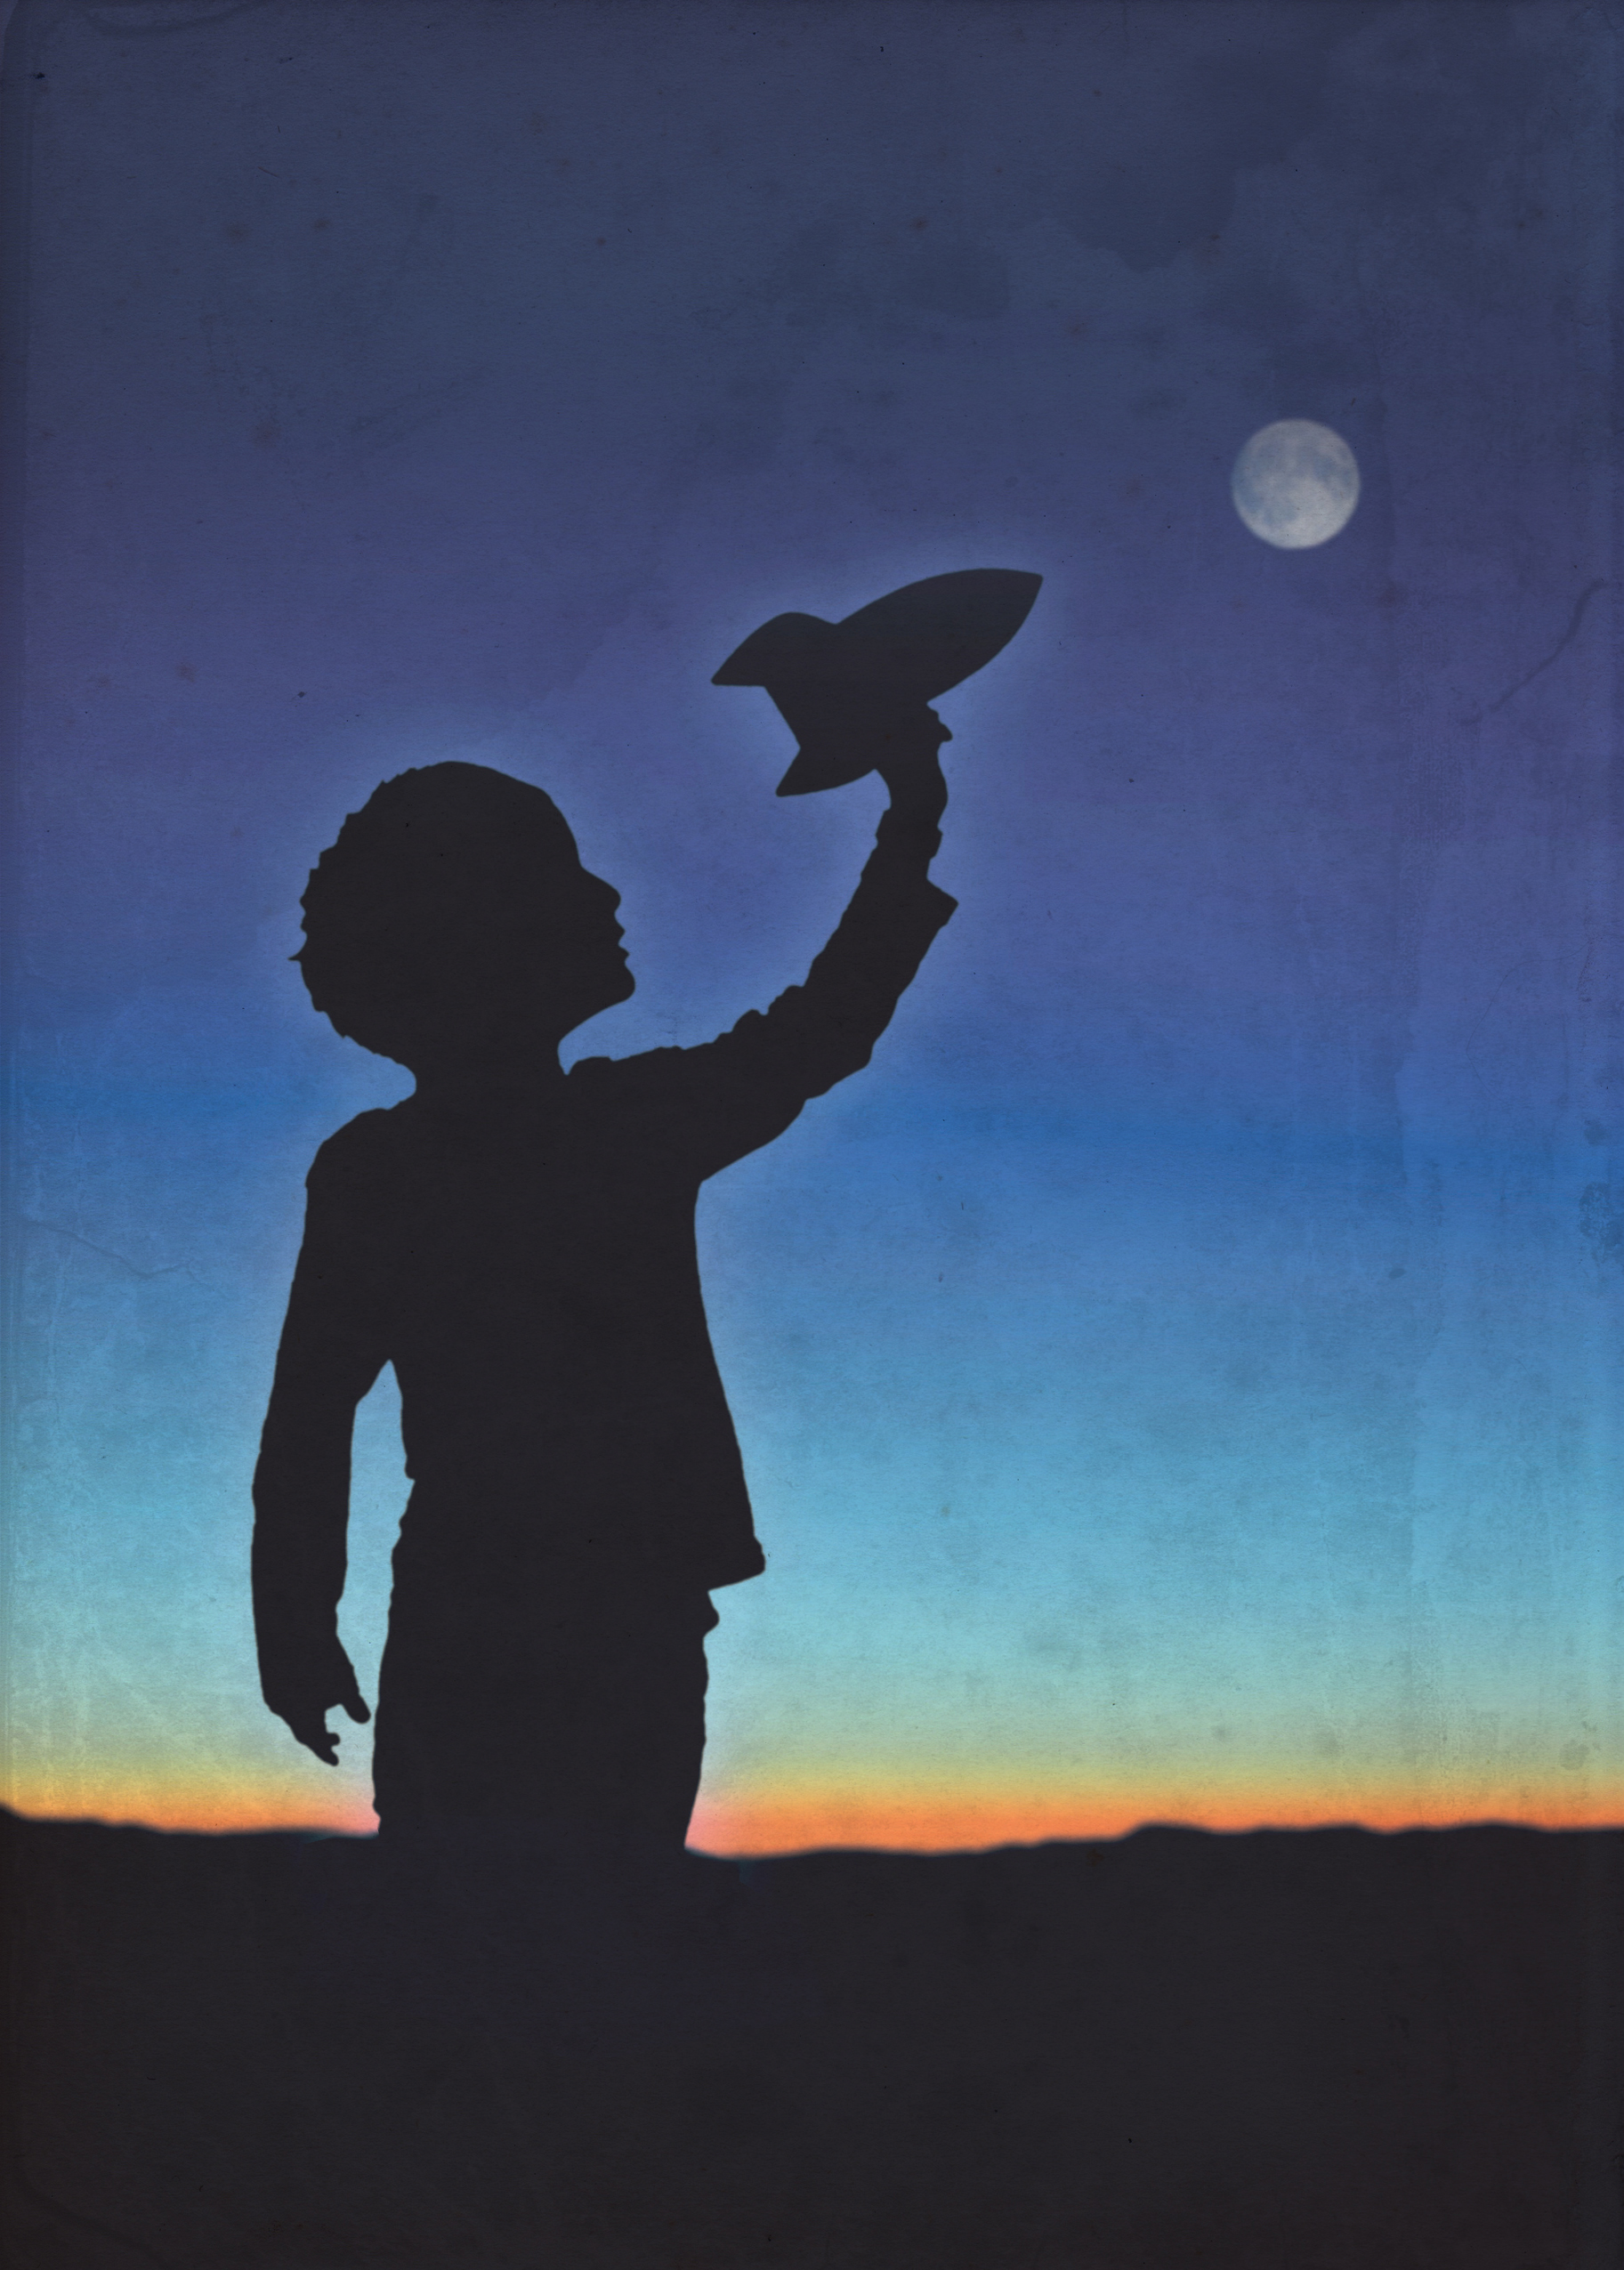 Silhouette of boy holding a rocket against a night sky.